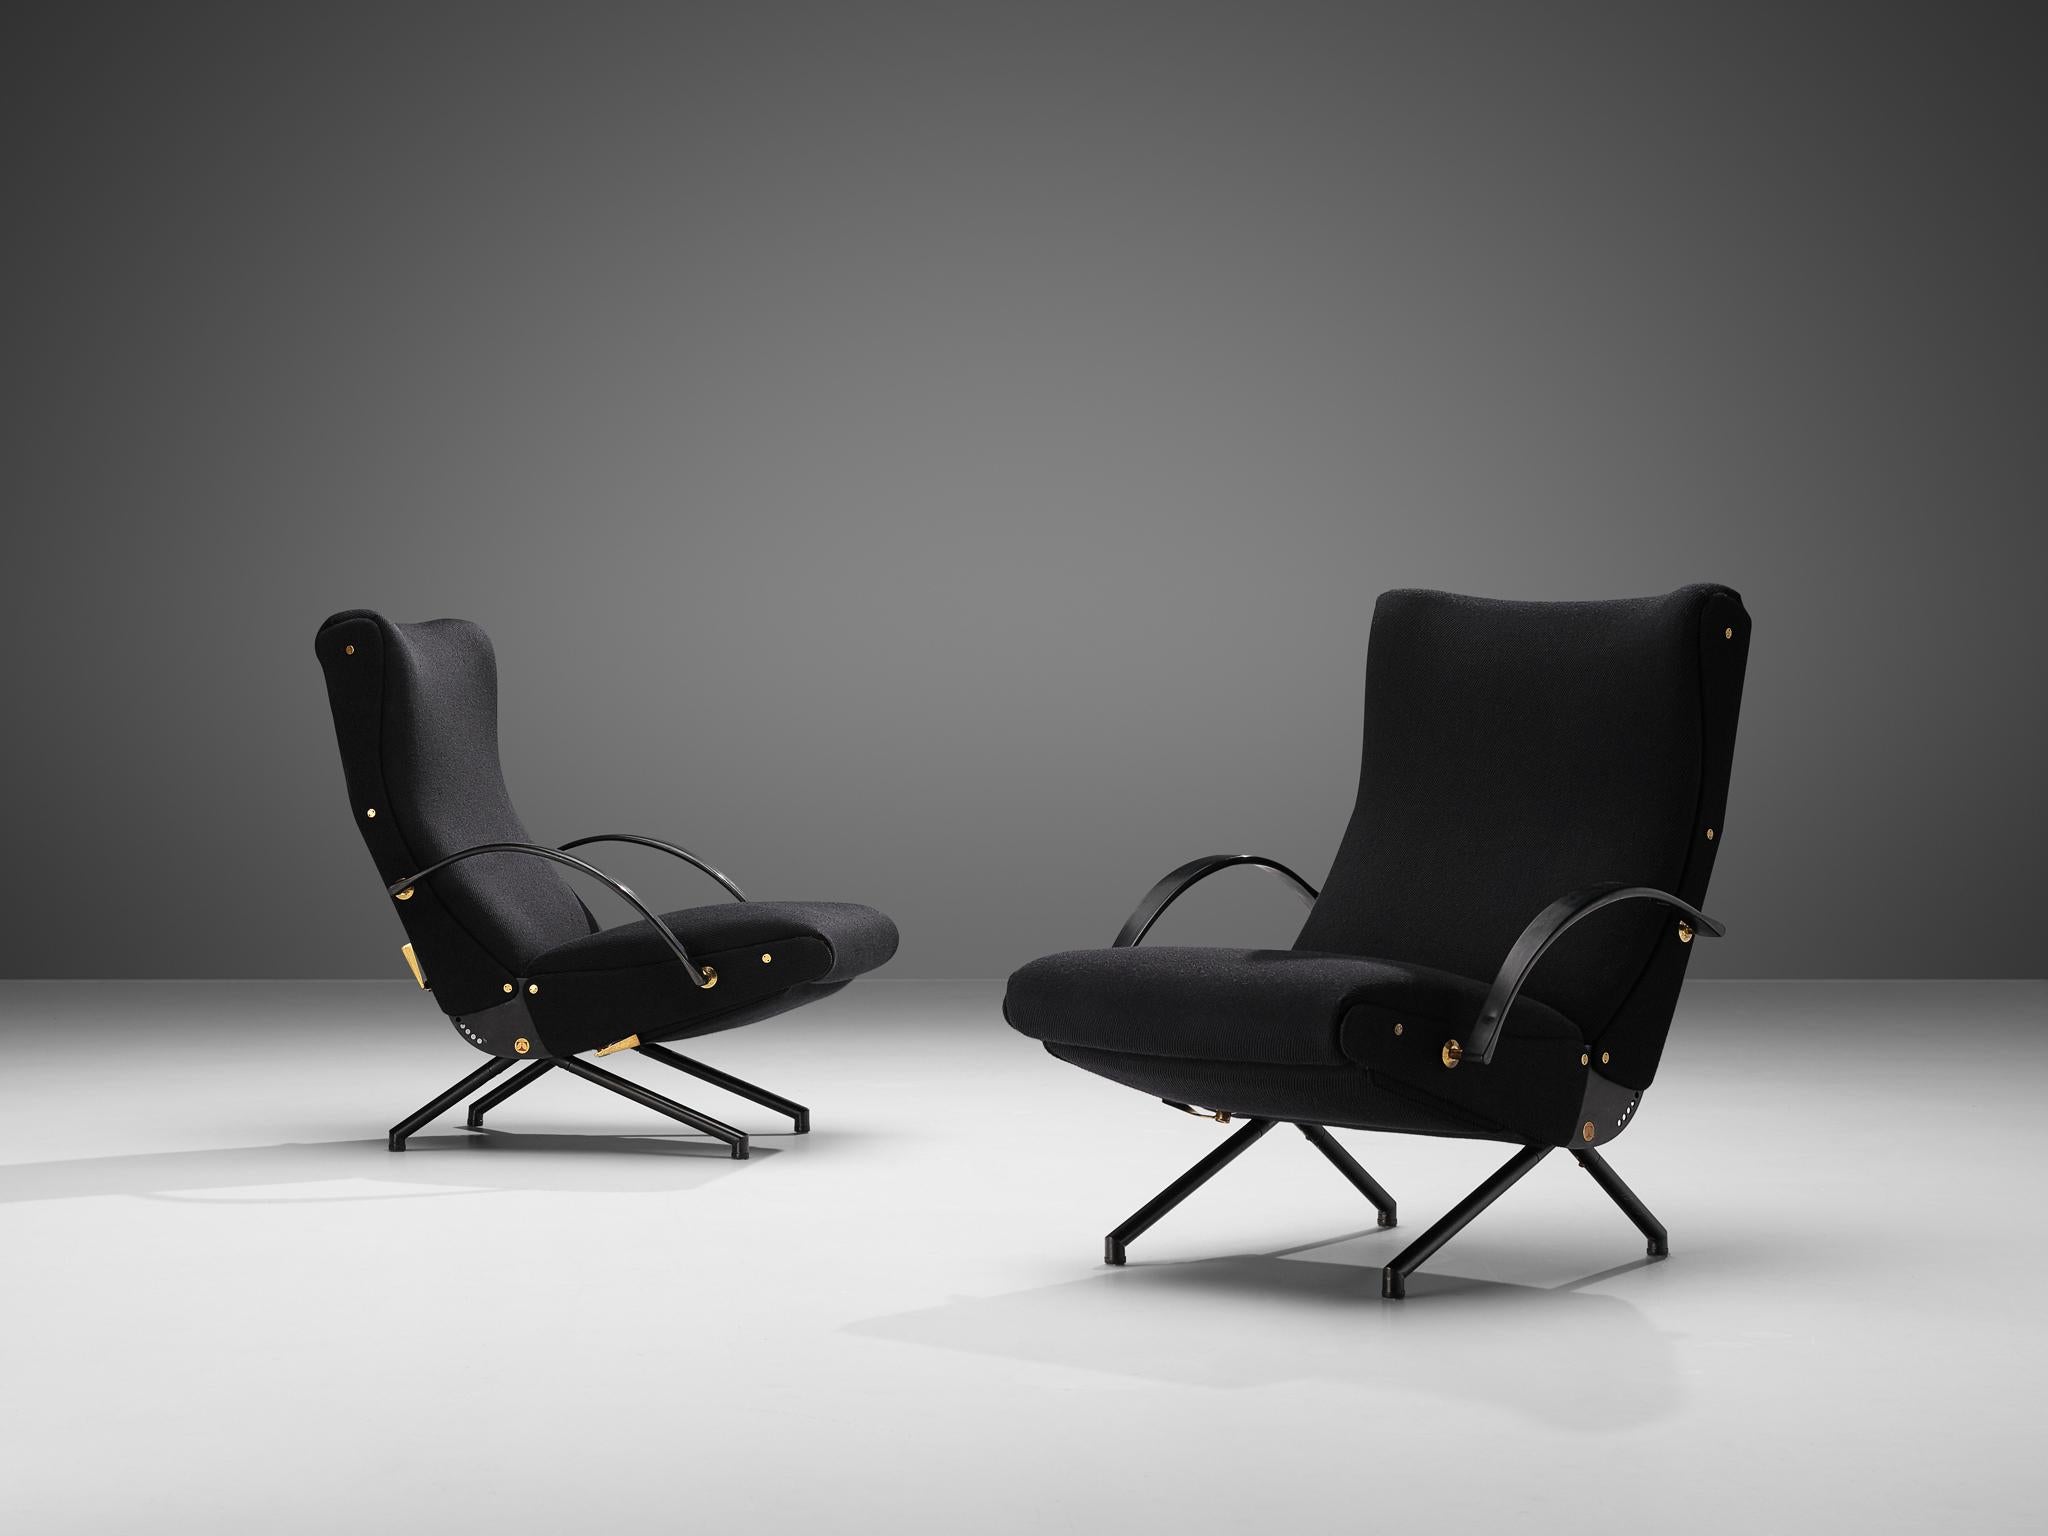 Osvaldo Borsani for Tecno, pair of P40 lounge chairs, original black fabric, metal, Italy, 1955.

These lounge chairs have been the result of the relentless search for an armchair that facilitated maximum relaxation. This search was in line with